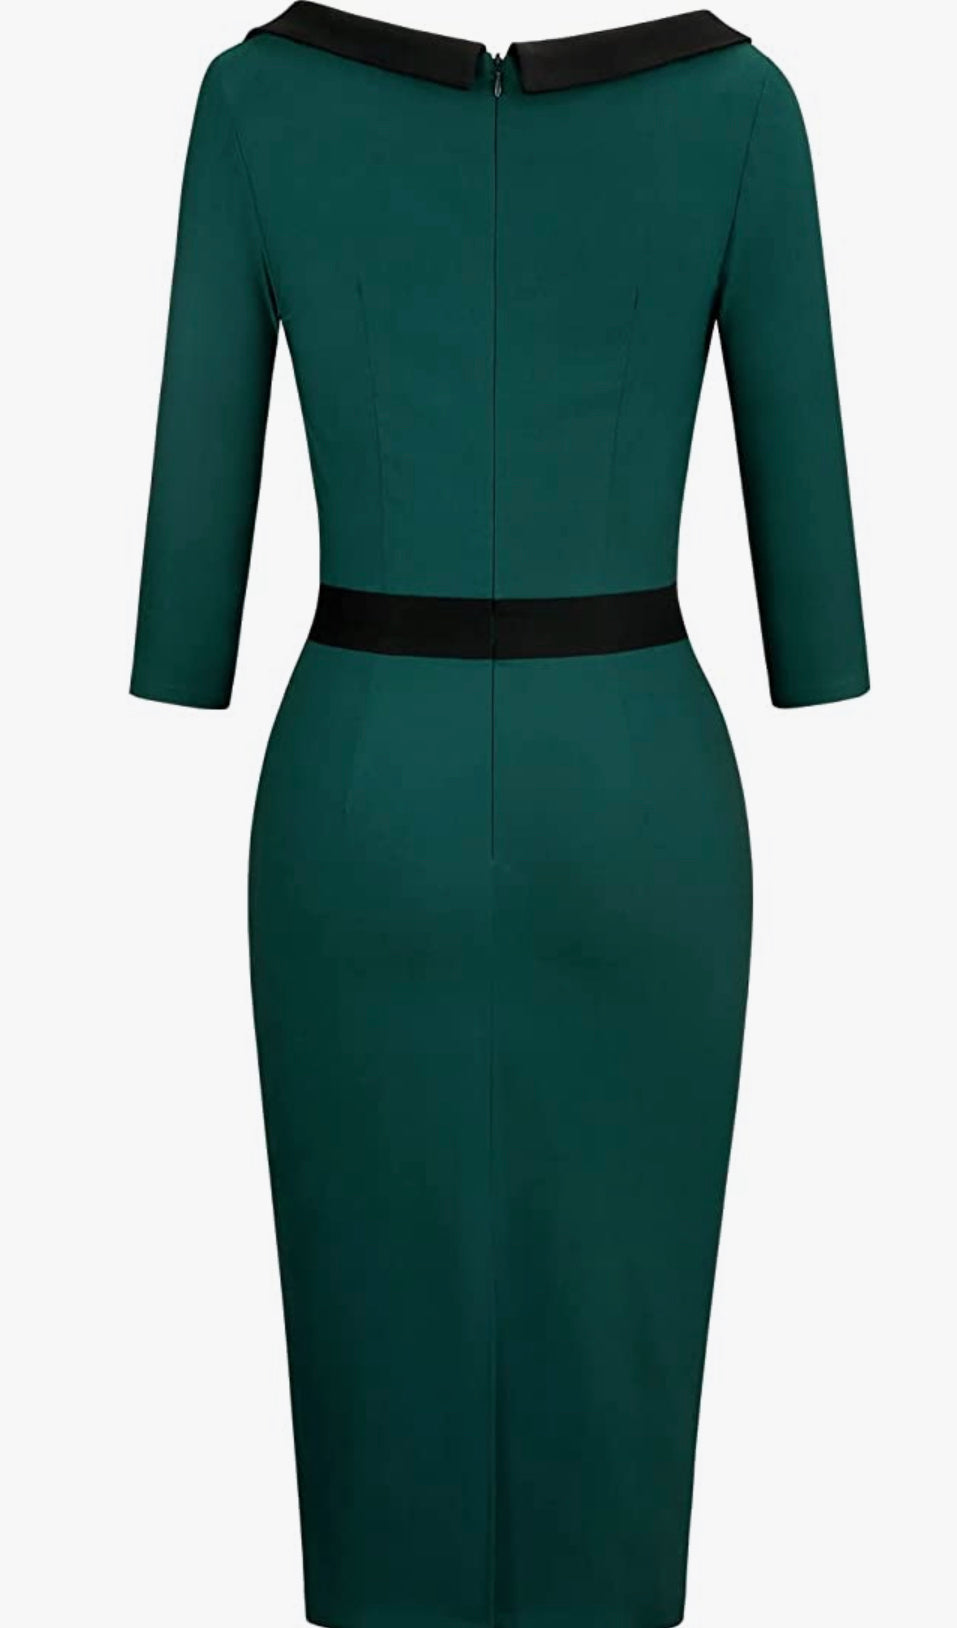 Green Vintage Inspired 3/4 Sleeve BodyCon Dress Sizes Small - 2XLarge (US 4 - 18)